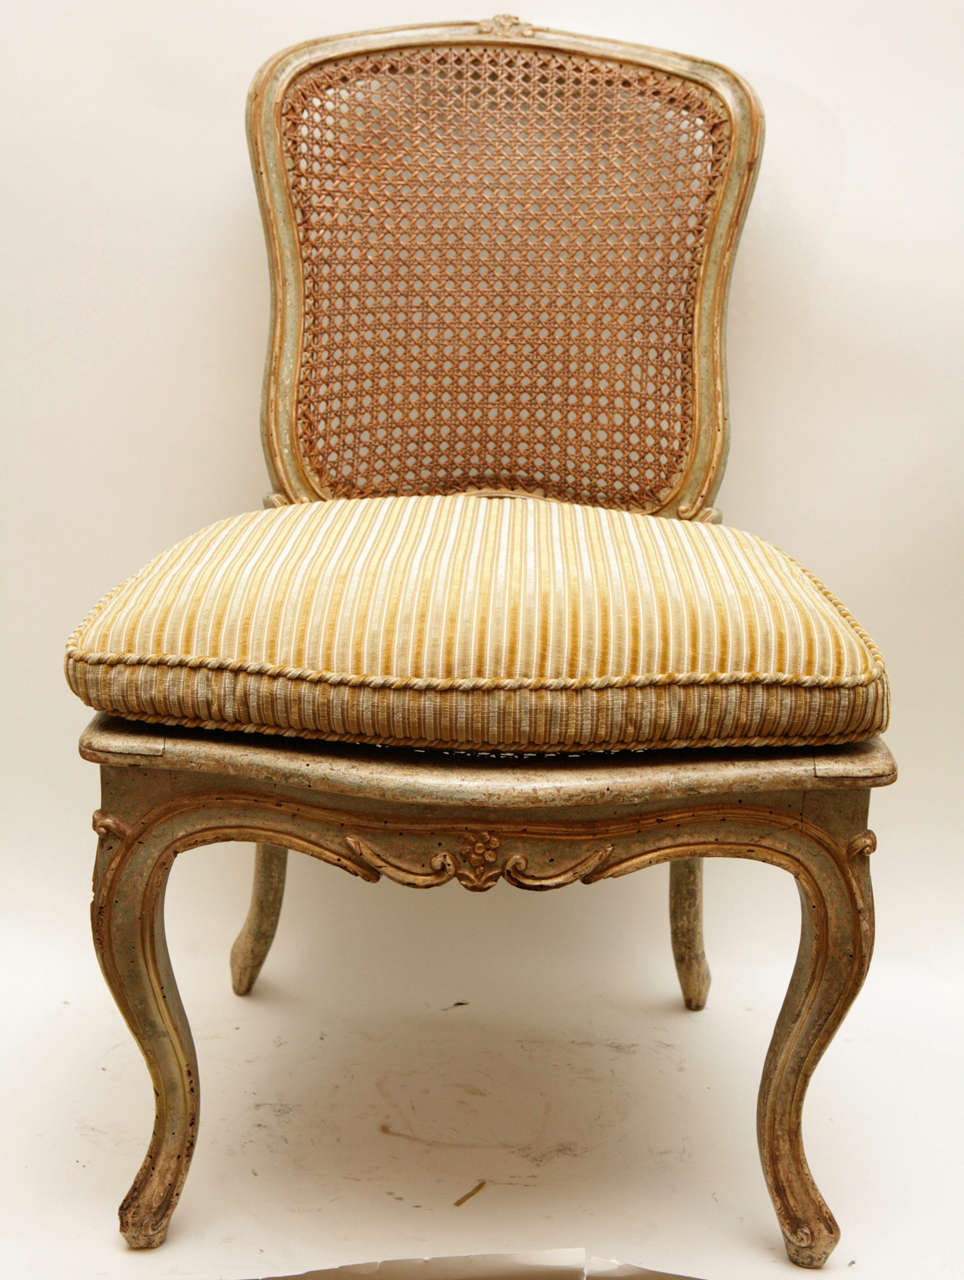 Late 18th century Group of four French Side Chairs with Cane Backs.  They are Carved Giltwood and they are Painted.